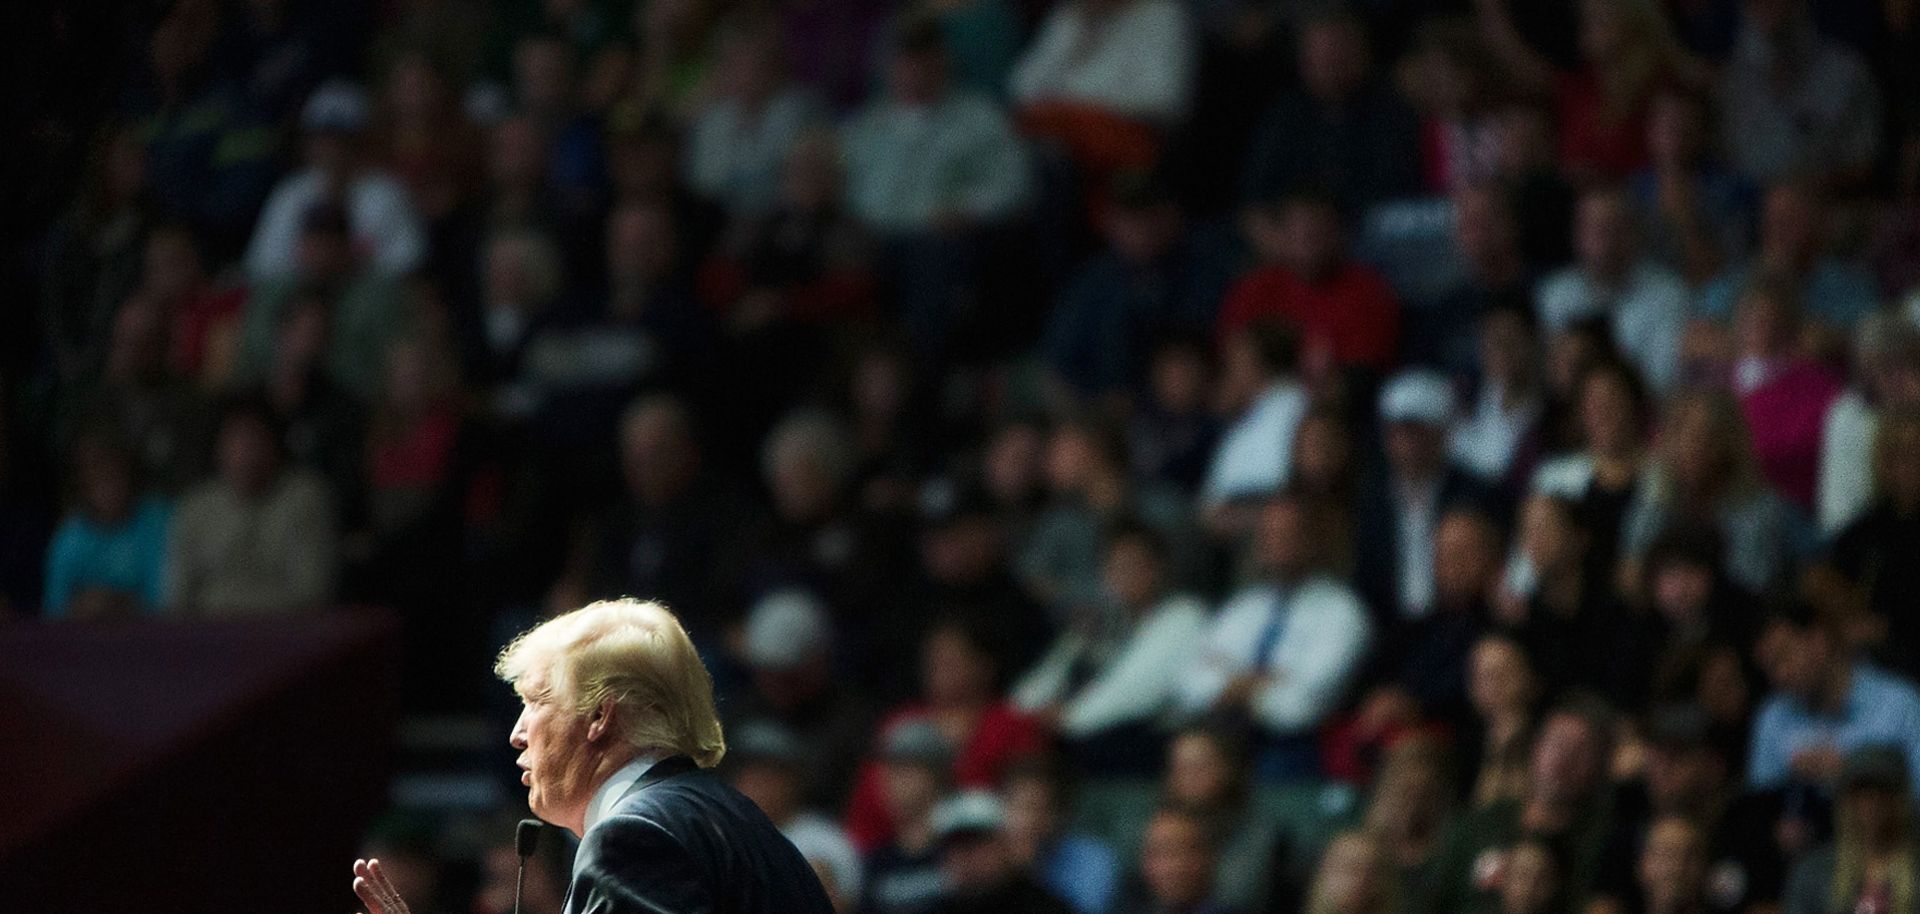 U.S. Republican presidential candidate Donald Trump speaks at a rally on Dec. 21, 2015.